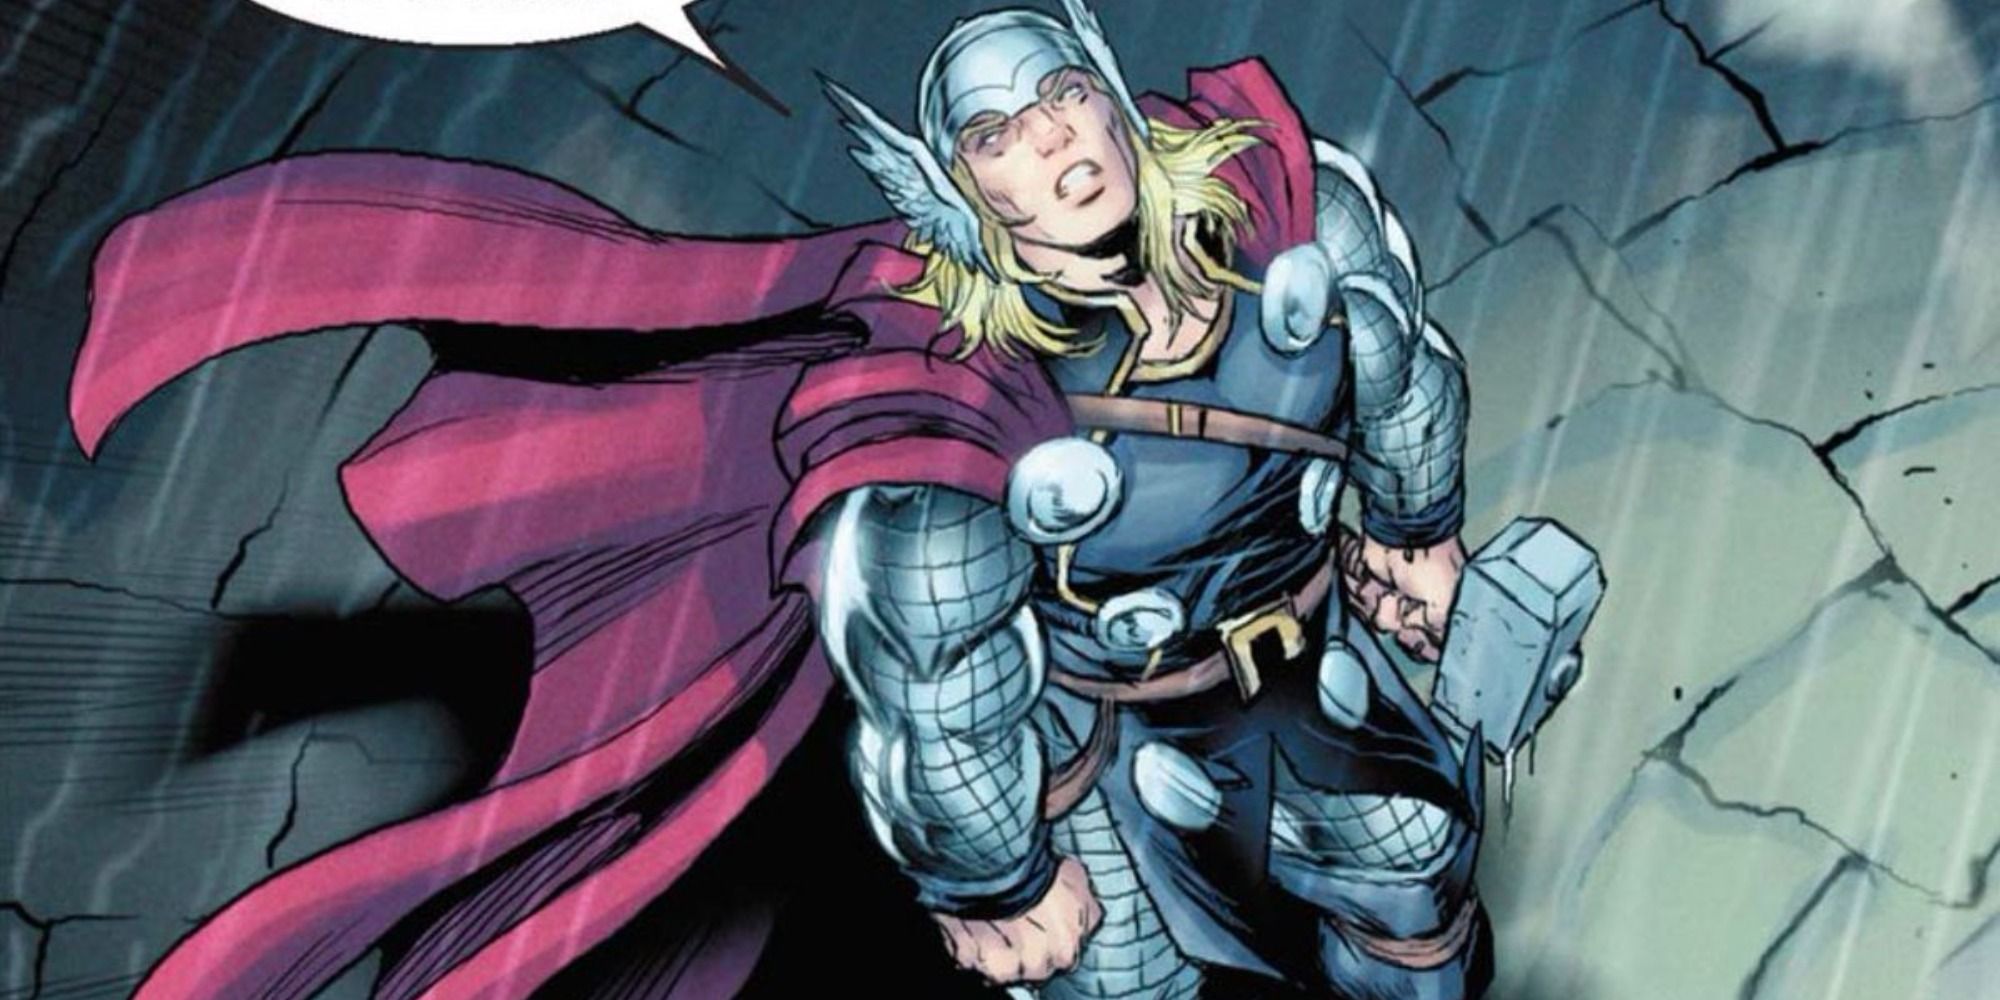 Thor looks up into the sky in Marvel Comics.